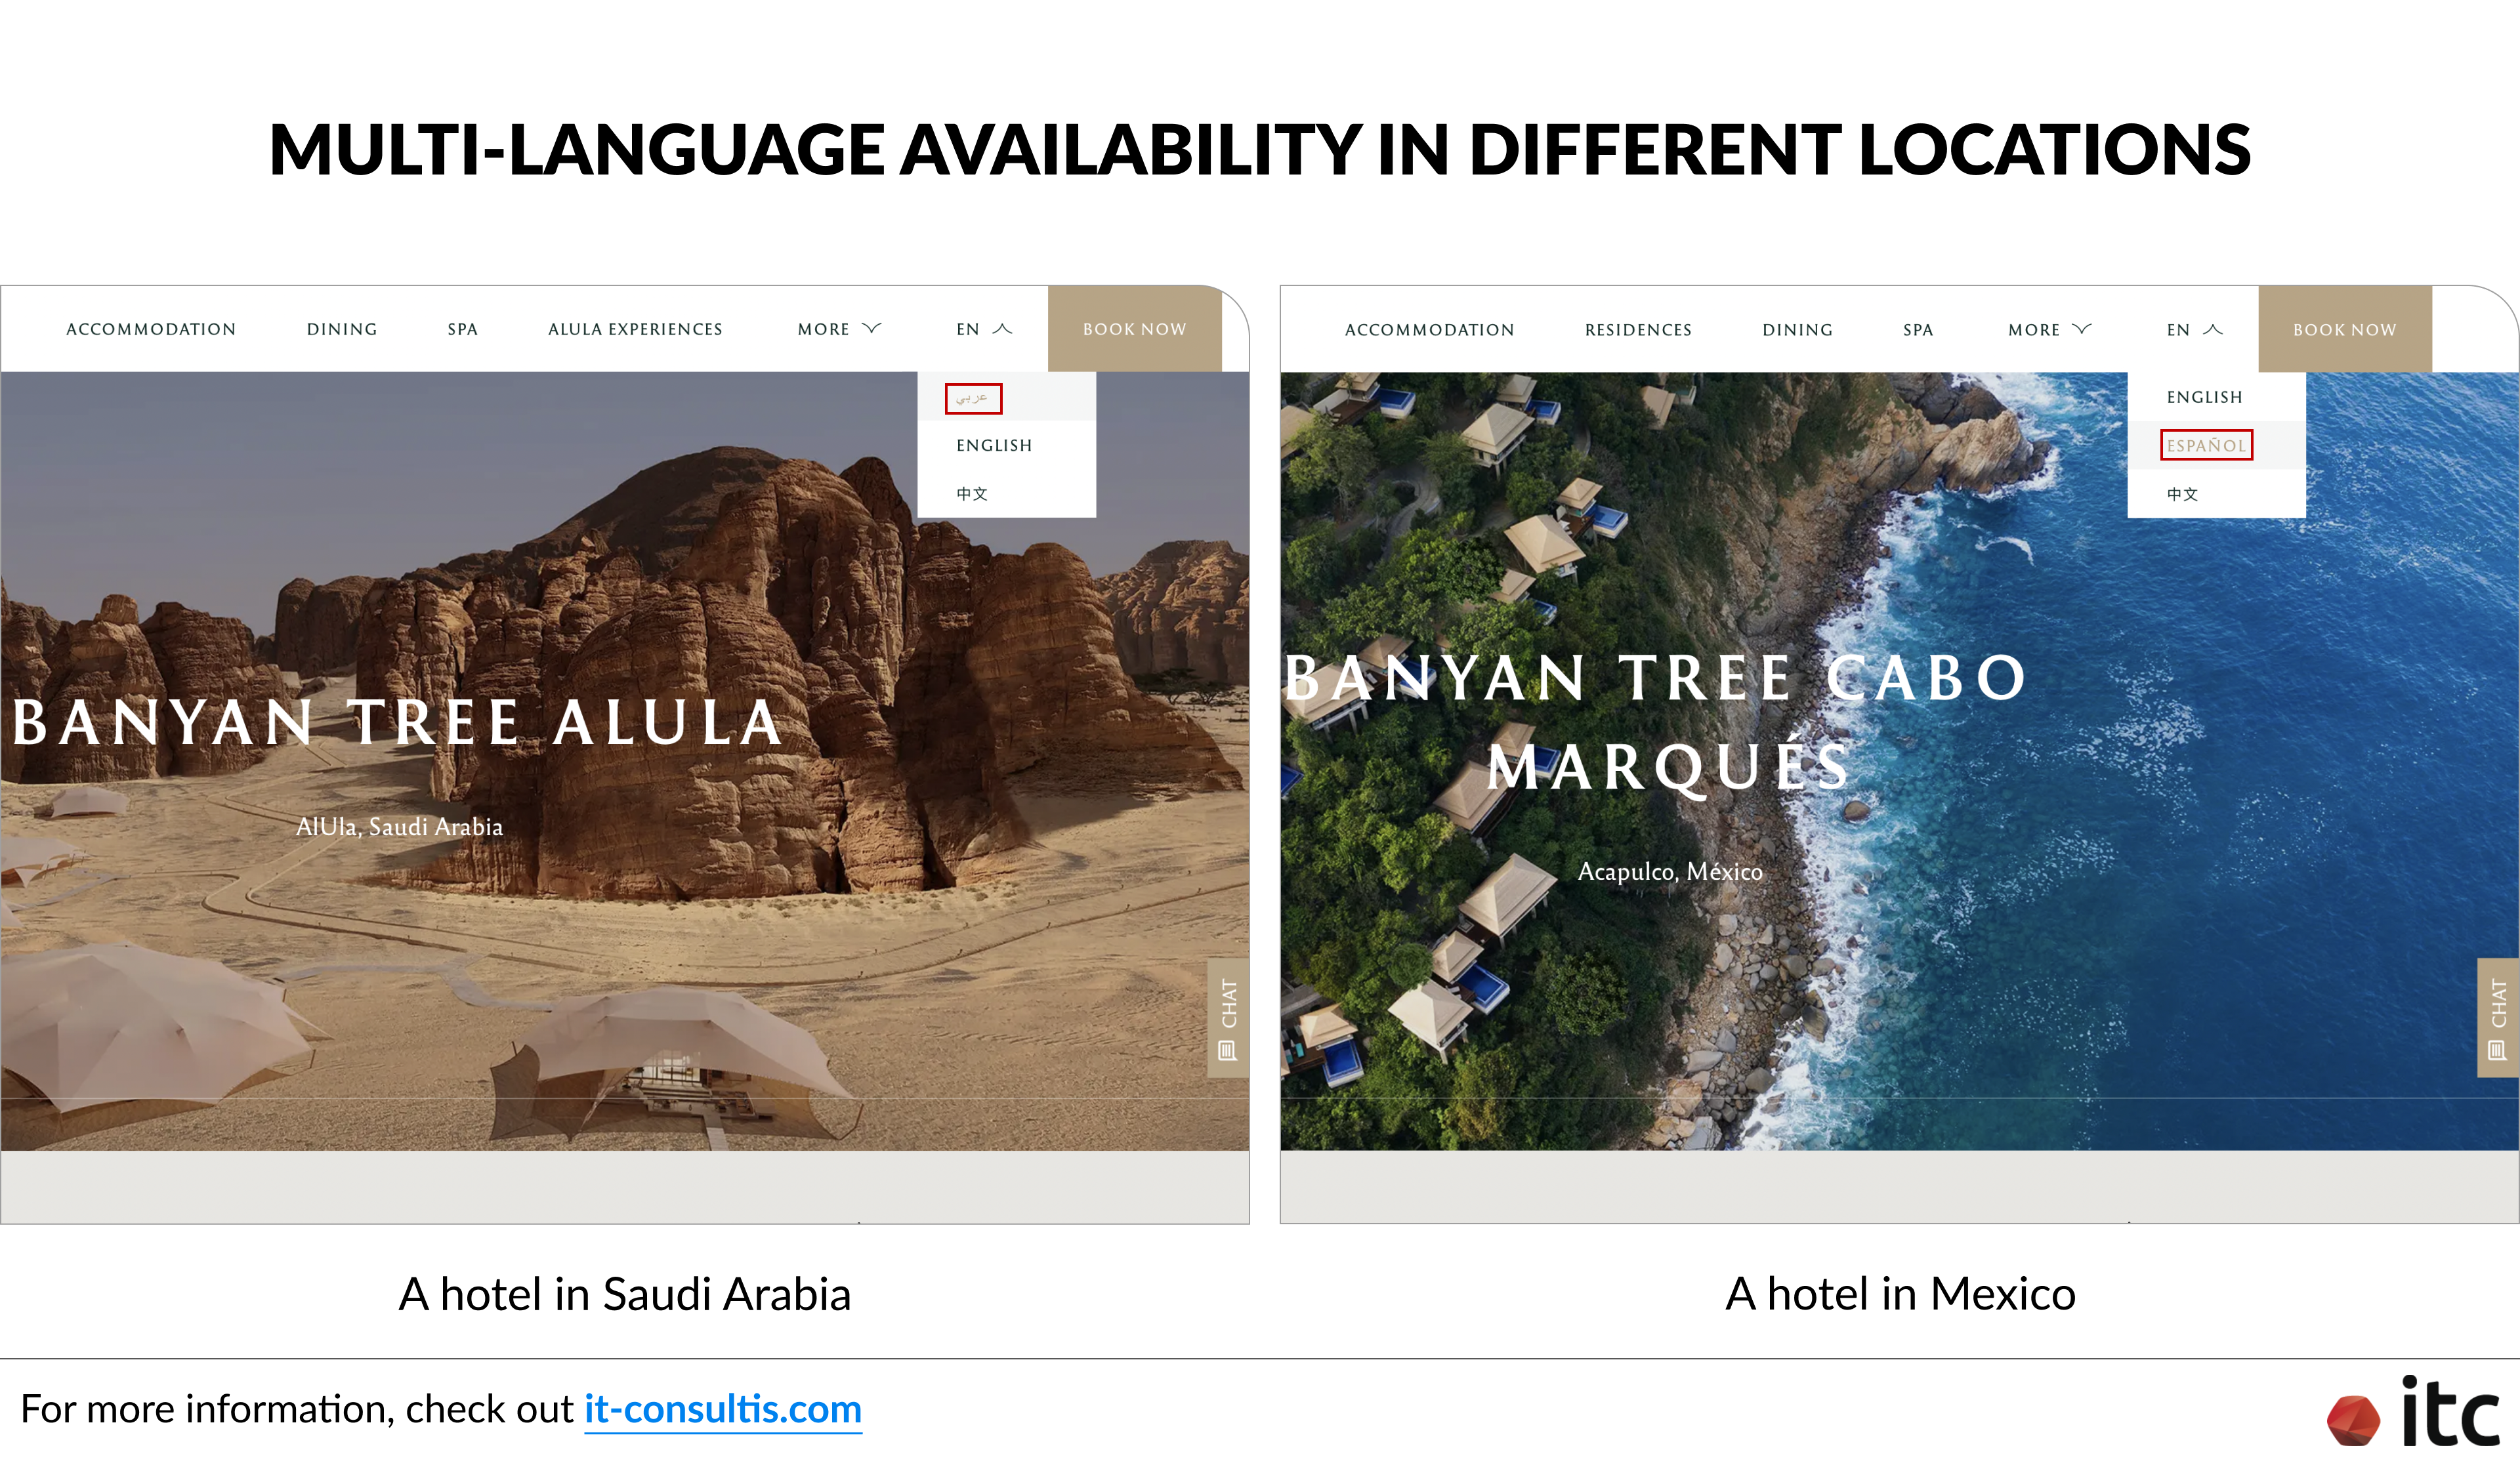 By leveraging Drupal’s built-in multi-language functionalities, Banyan Tree can now support different language sets for different hotels